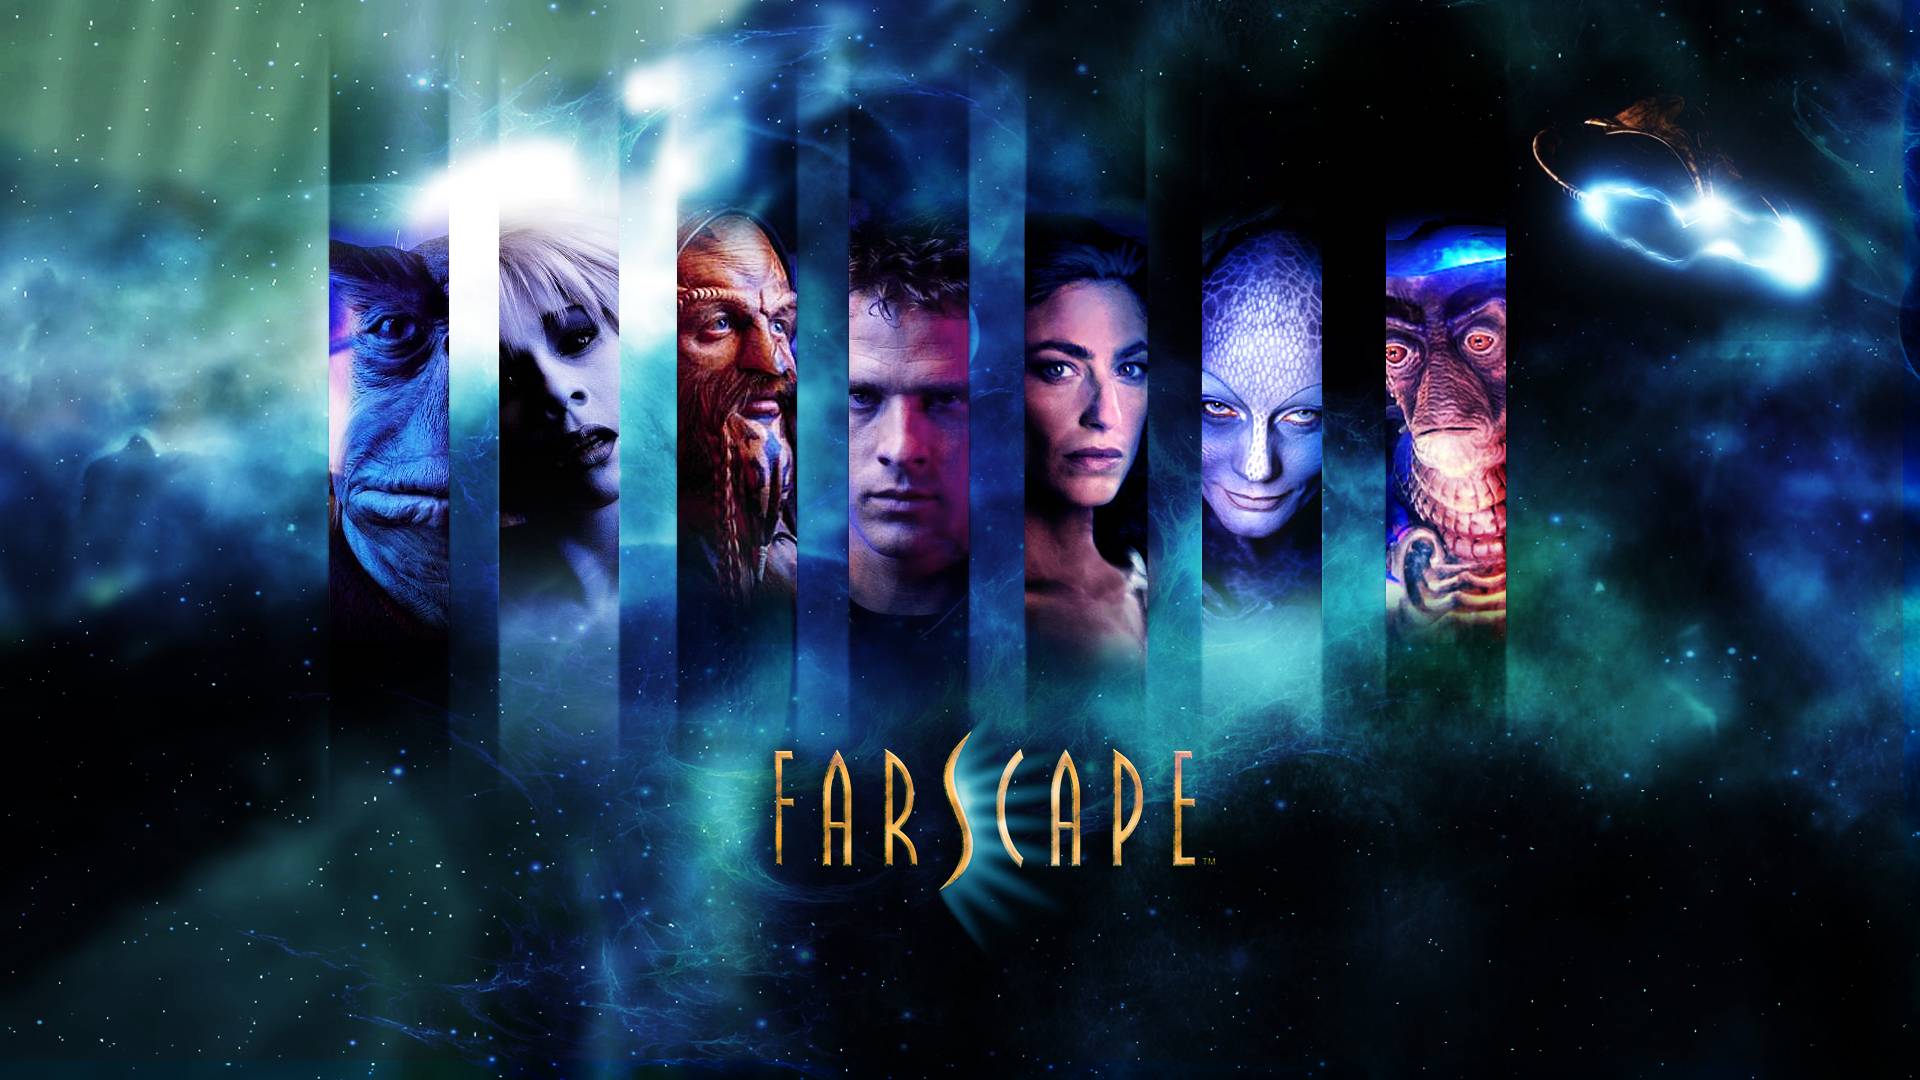 Farscape Wallpaper For Is An